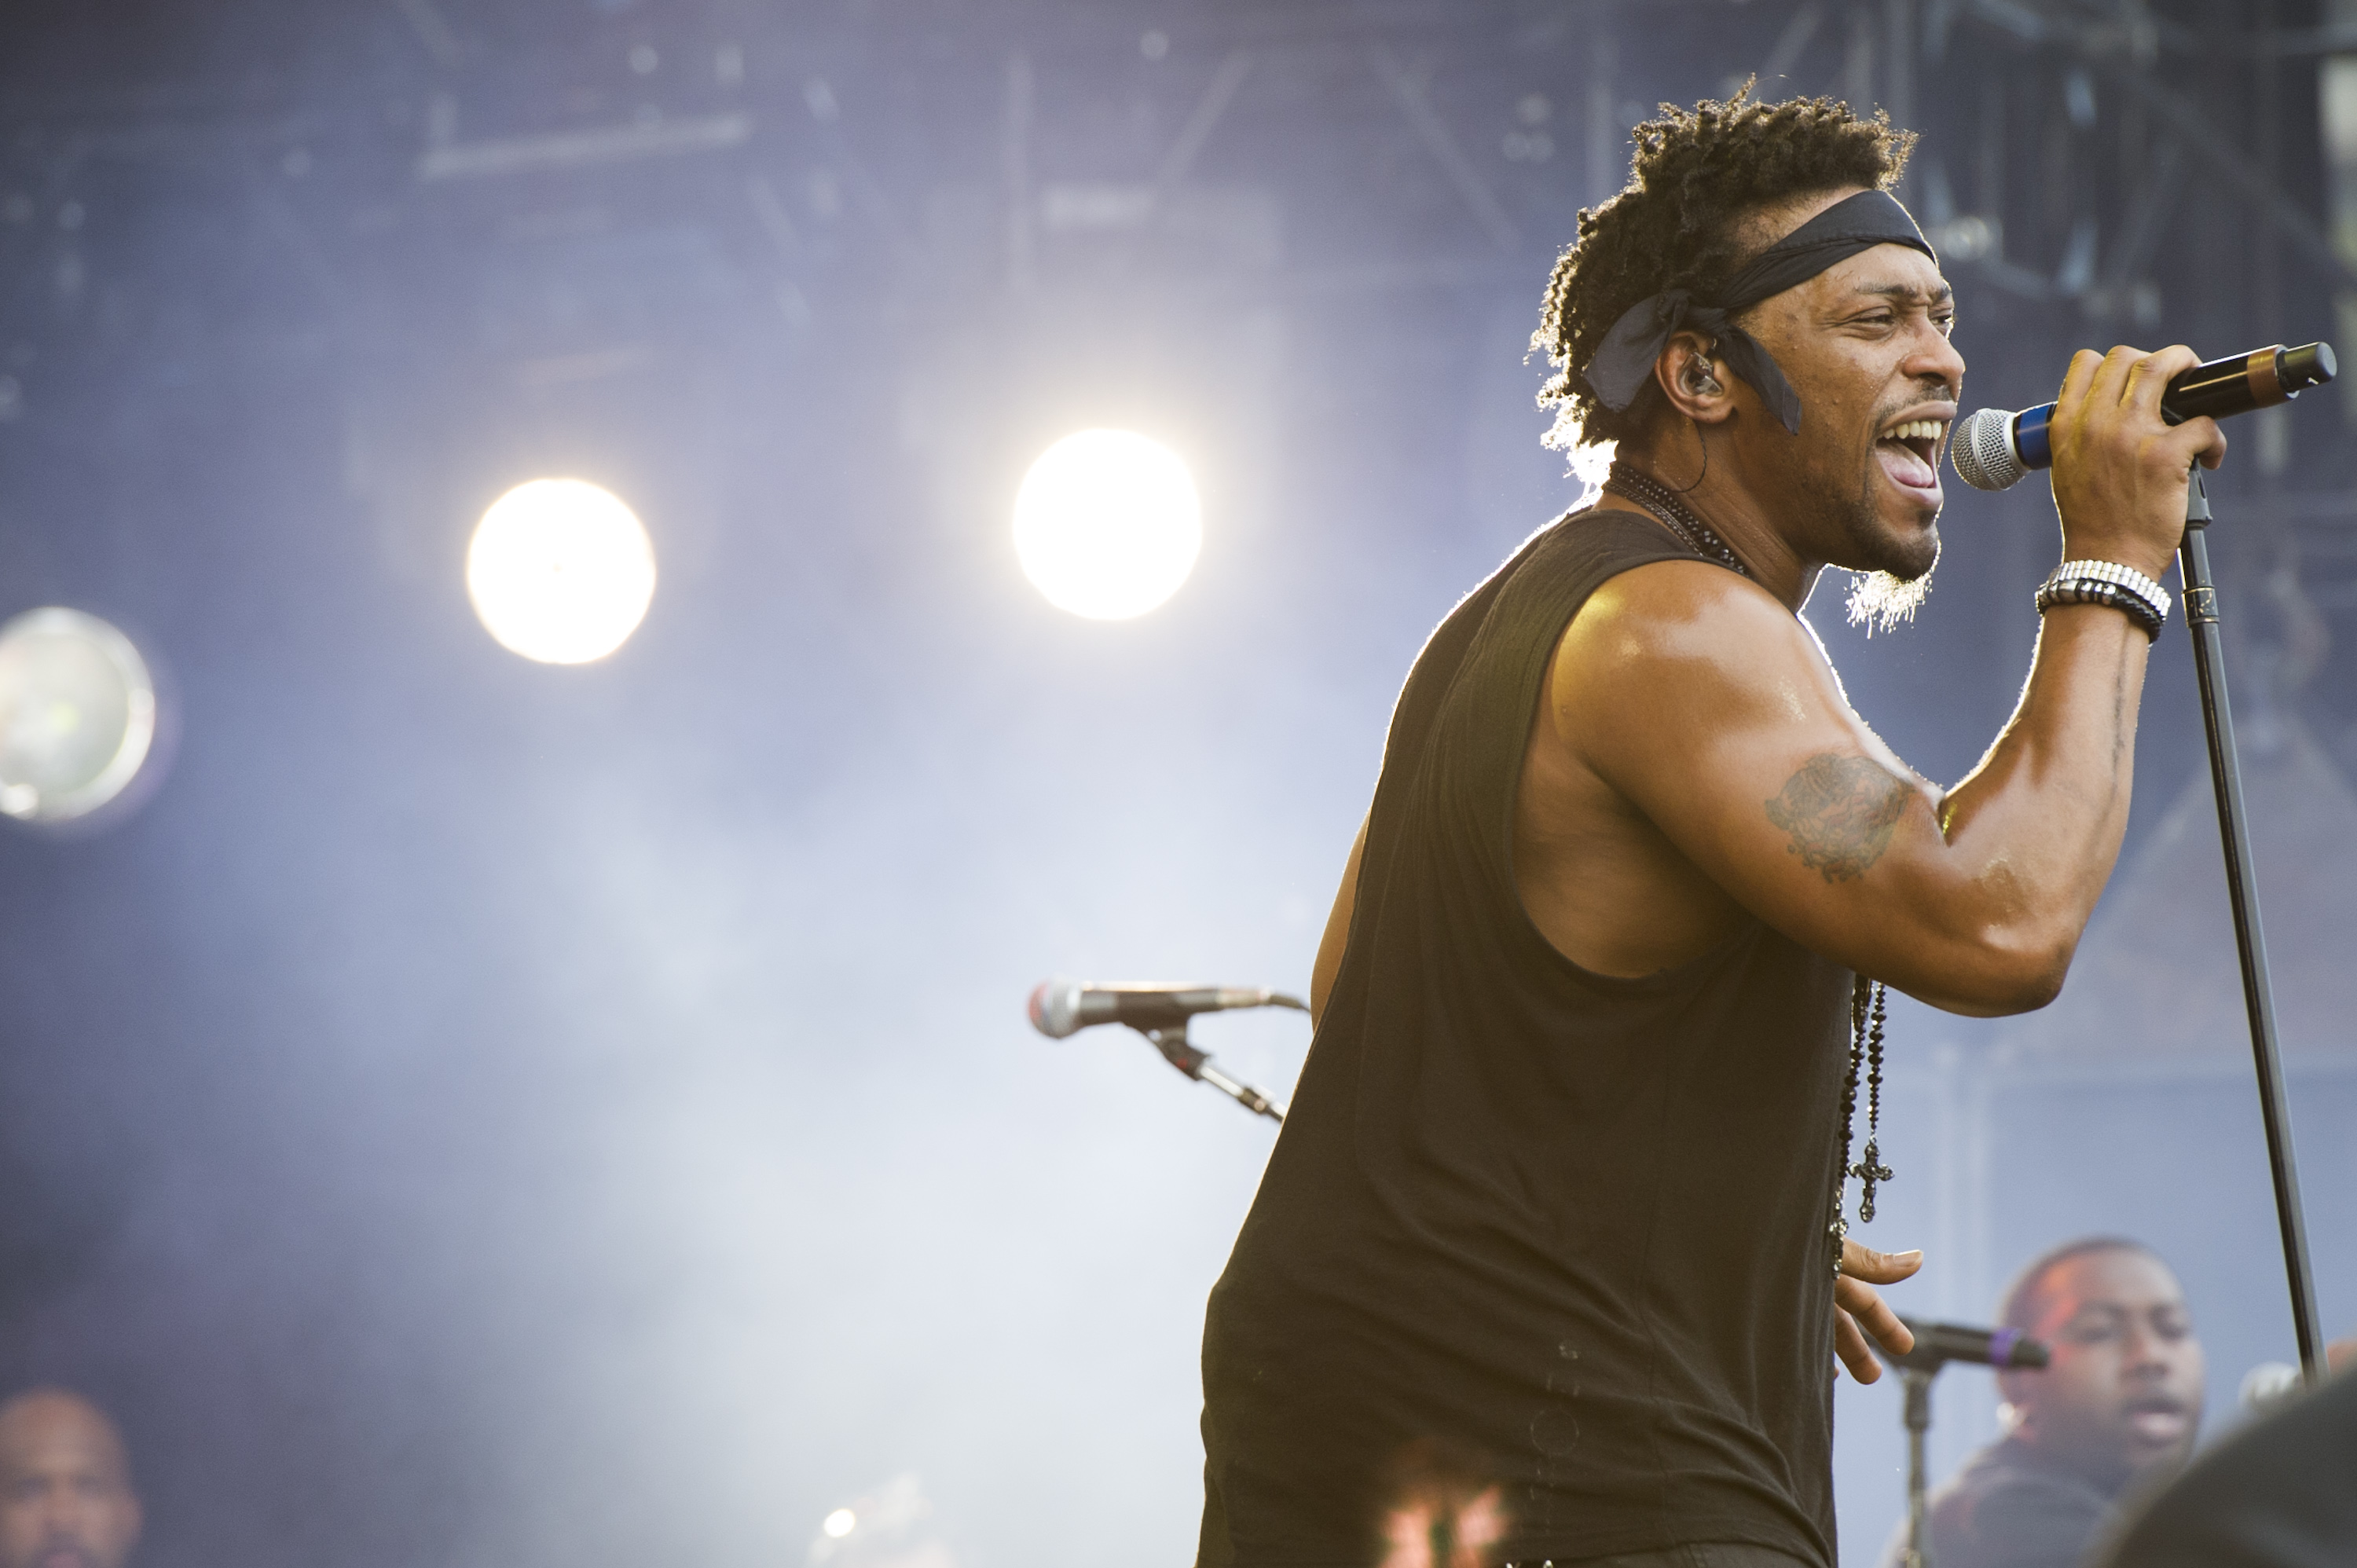 D'Angelo performing in 2012. (Charles Sykes—Invision/AP)